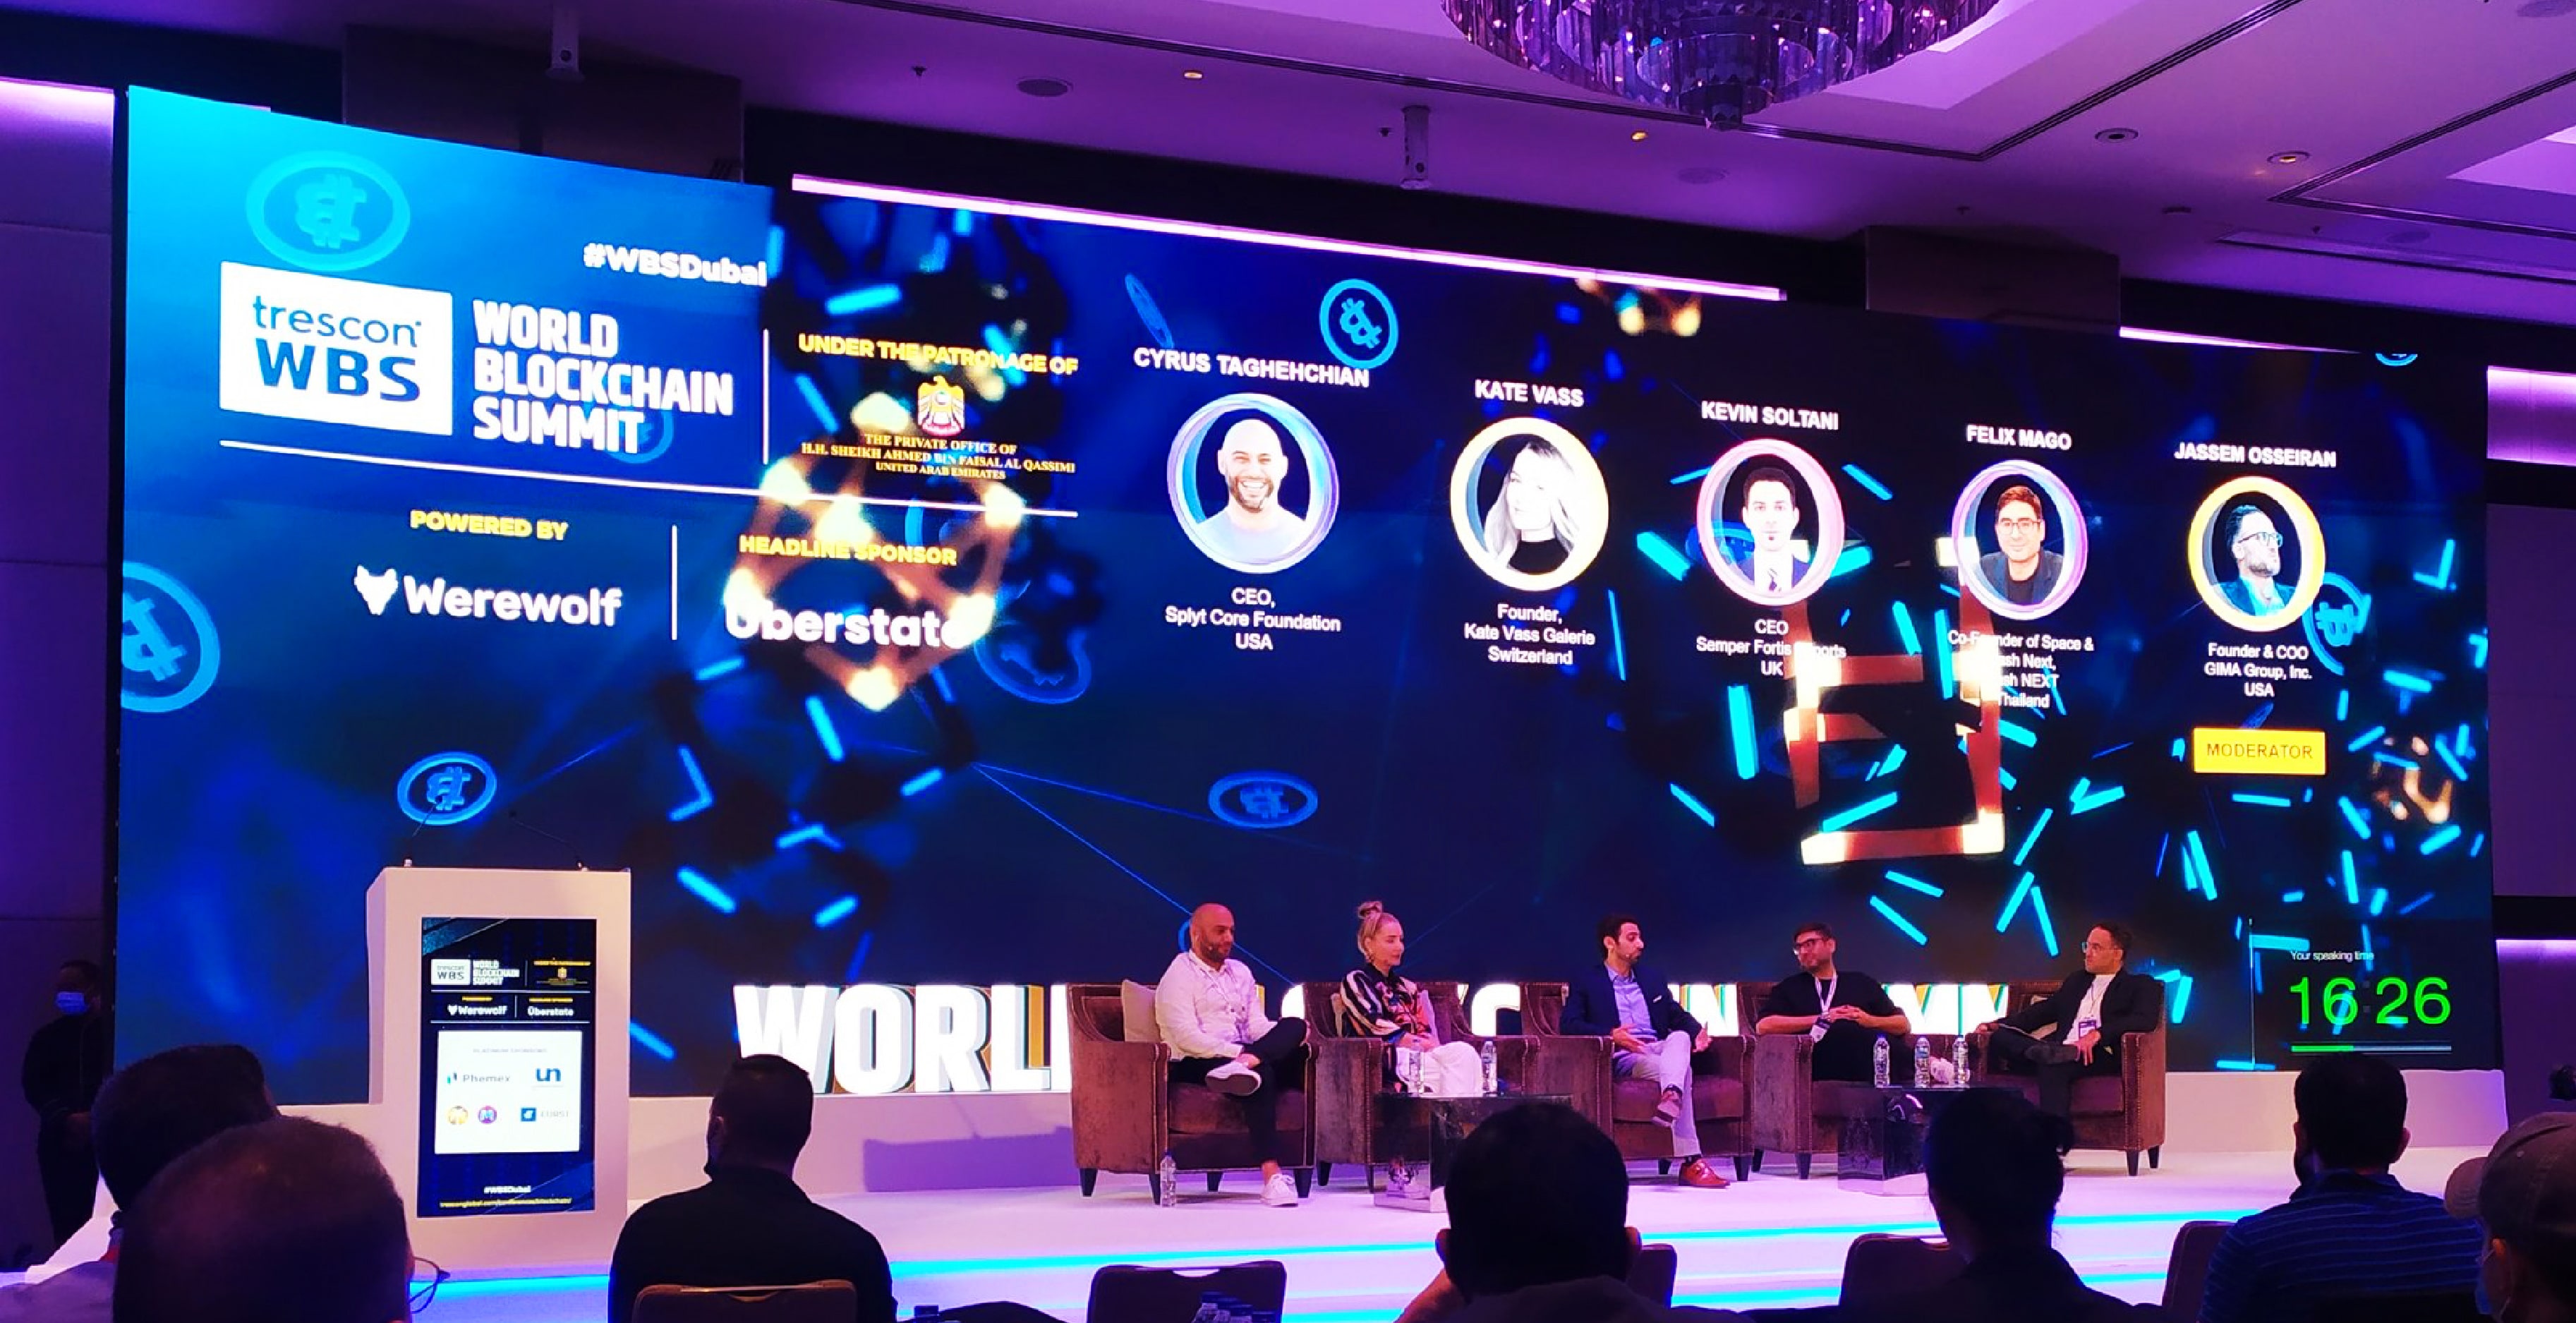 World Blockchain Summit attracts the participation of global organizations and investors (Image: Tresconglobal)